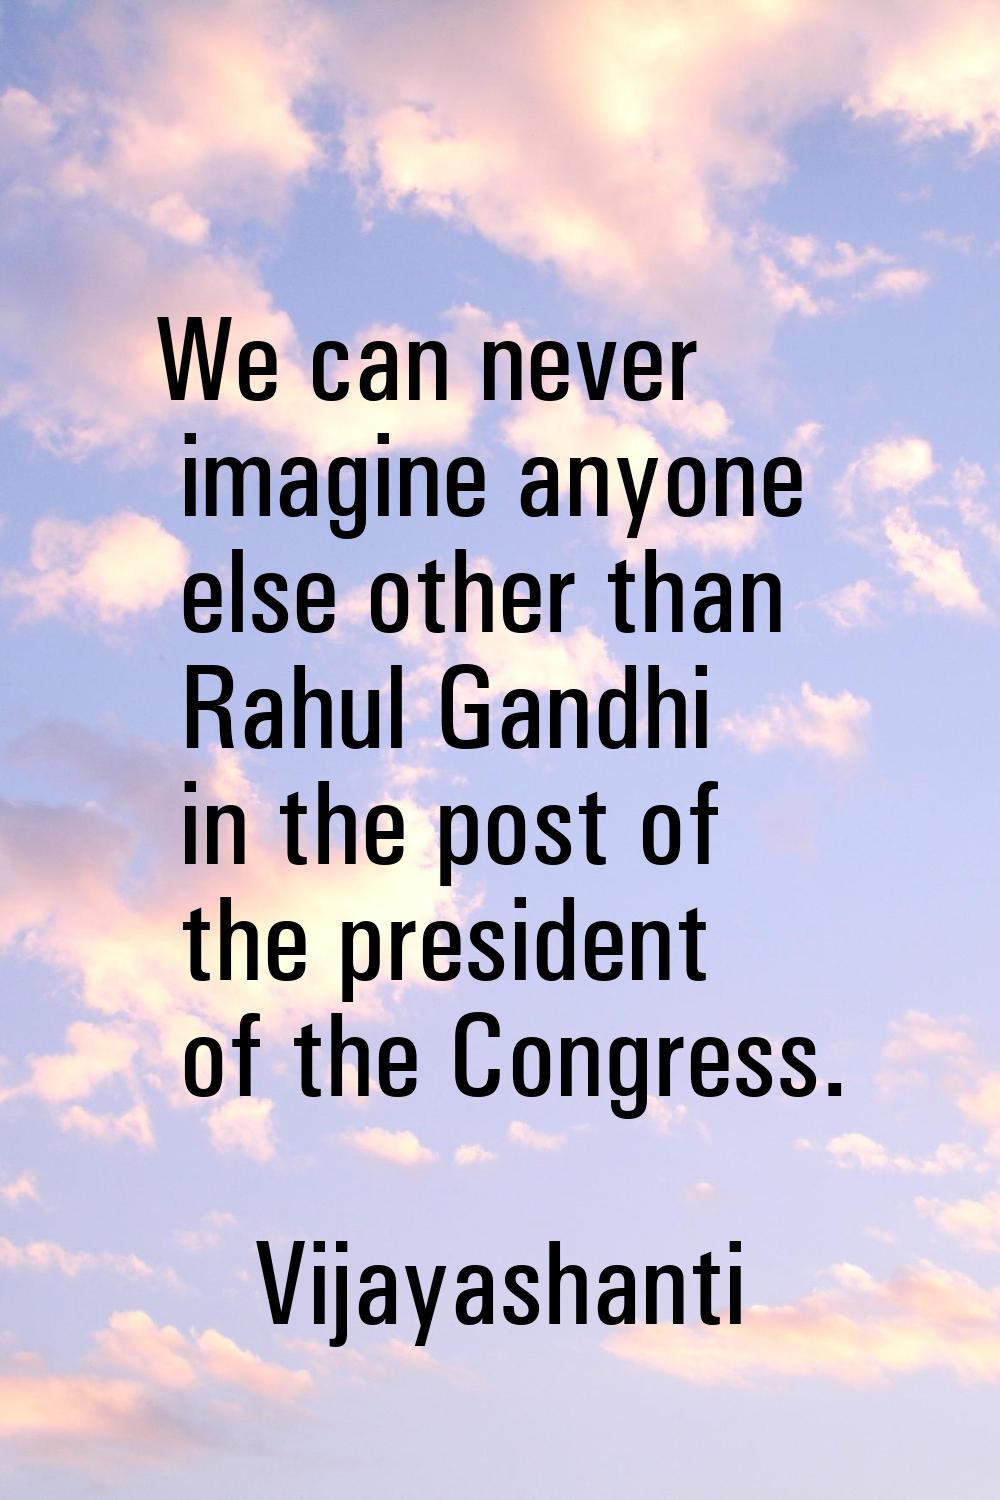 We can never imagine anyone else other than Rahul Gandhi in the post of the president of the Congre